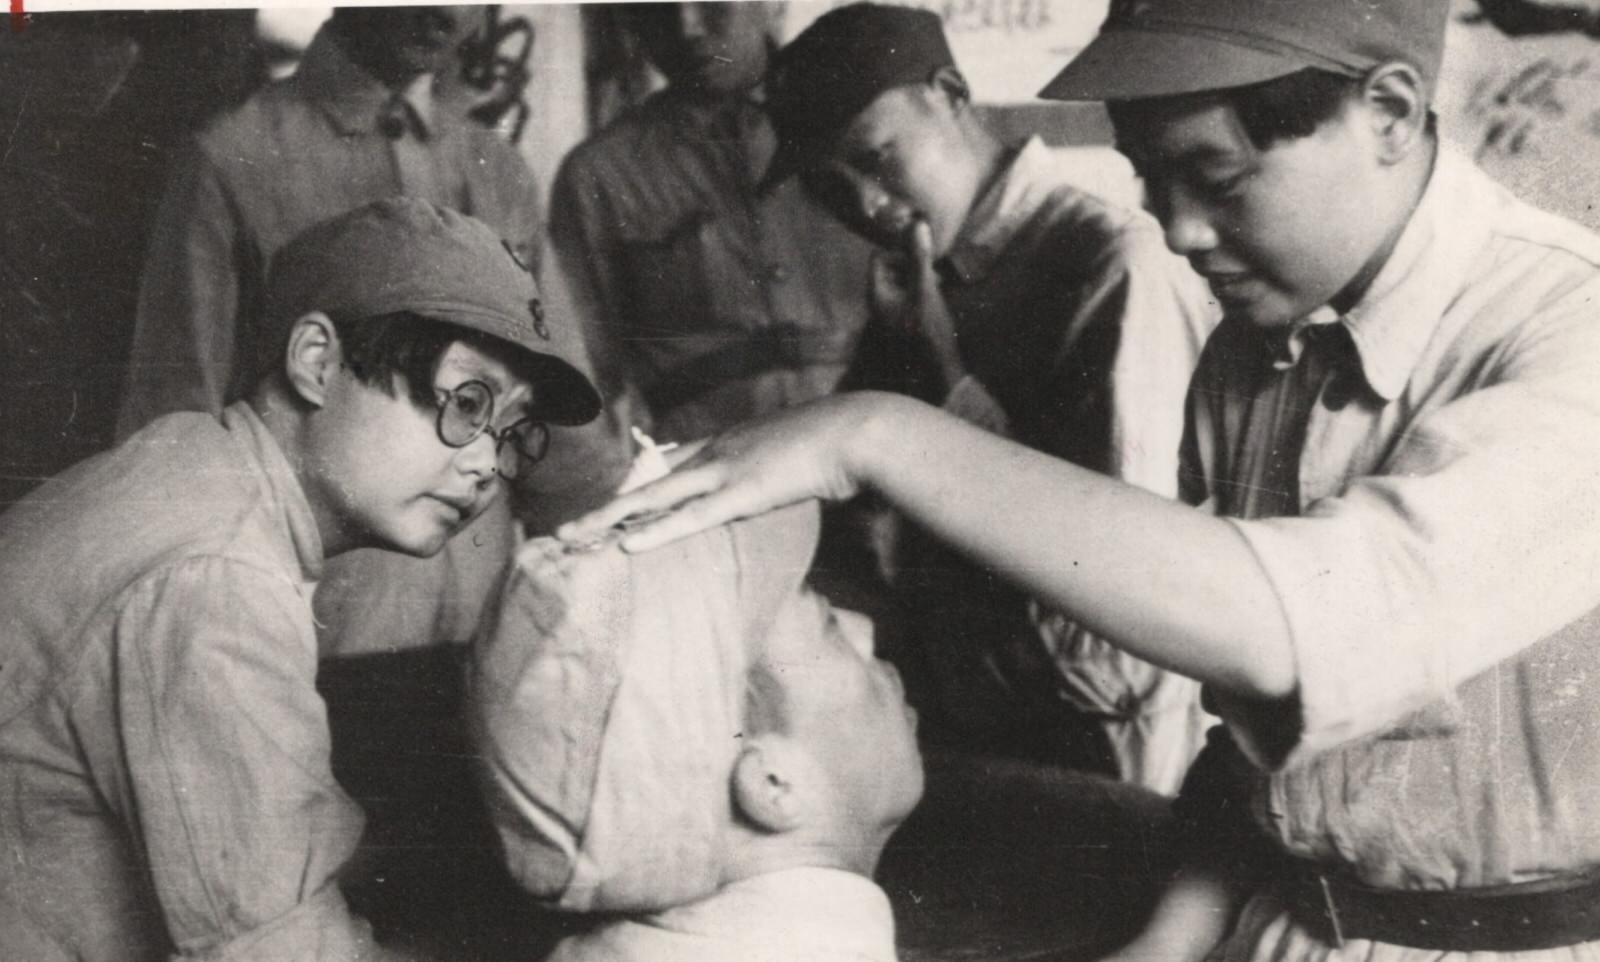 Qualified women nurse conducting a physical examination of guerrilla troops along the Tientsin-Nanking (Tianjin-Nanjing) railway in Anhwei (Anhui) Province. These young women were formerly nurses in Nanking (Nanjing).